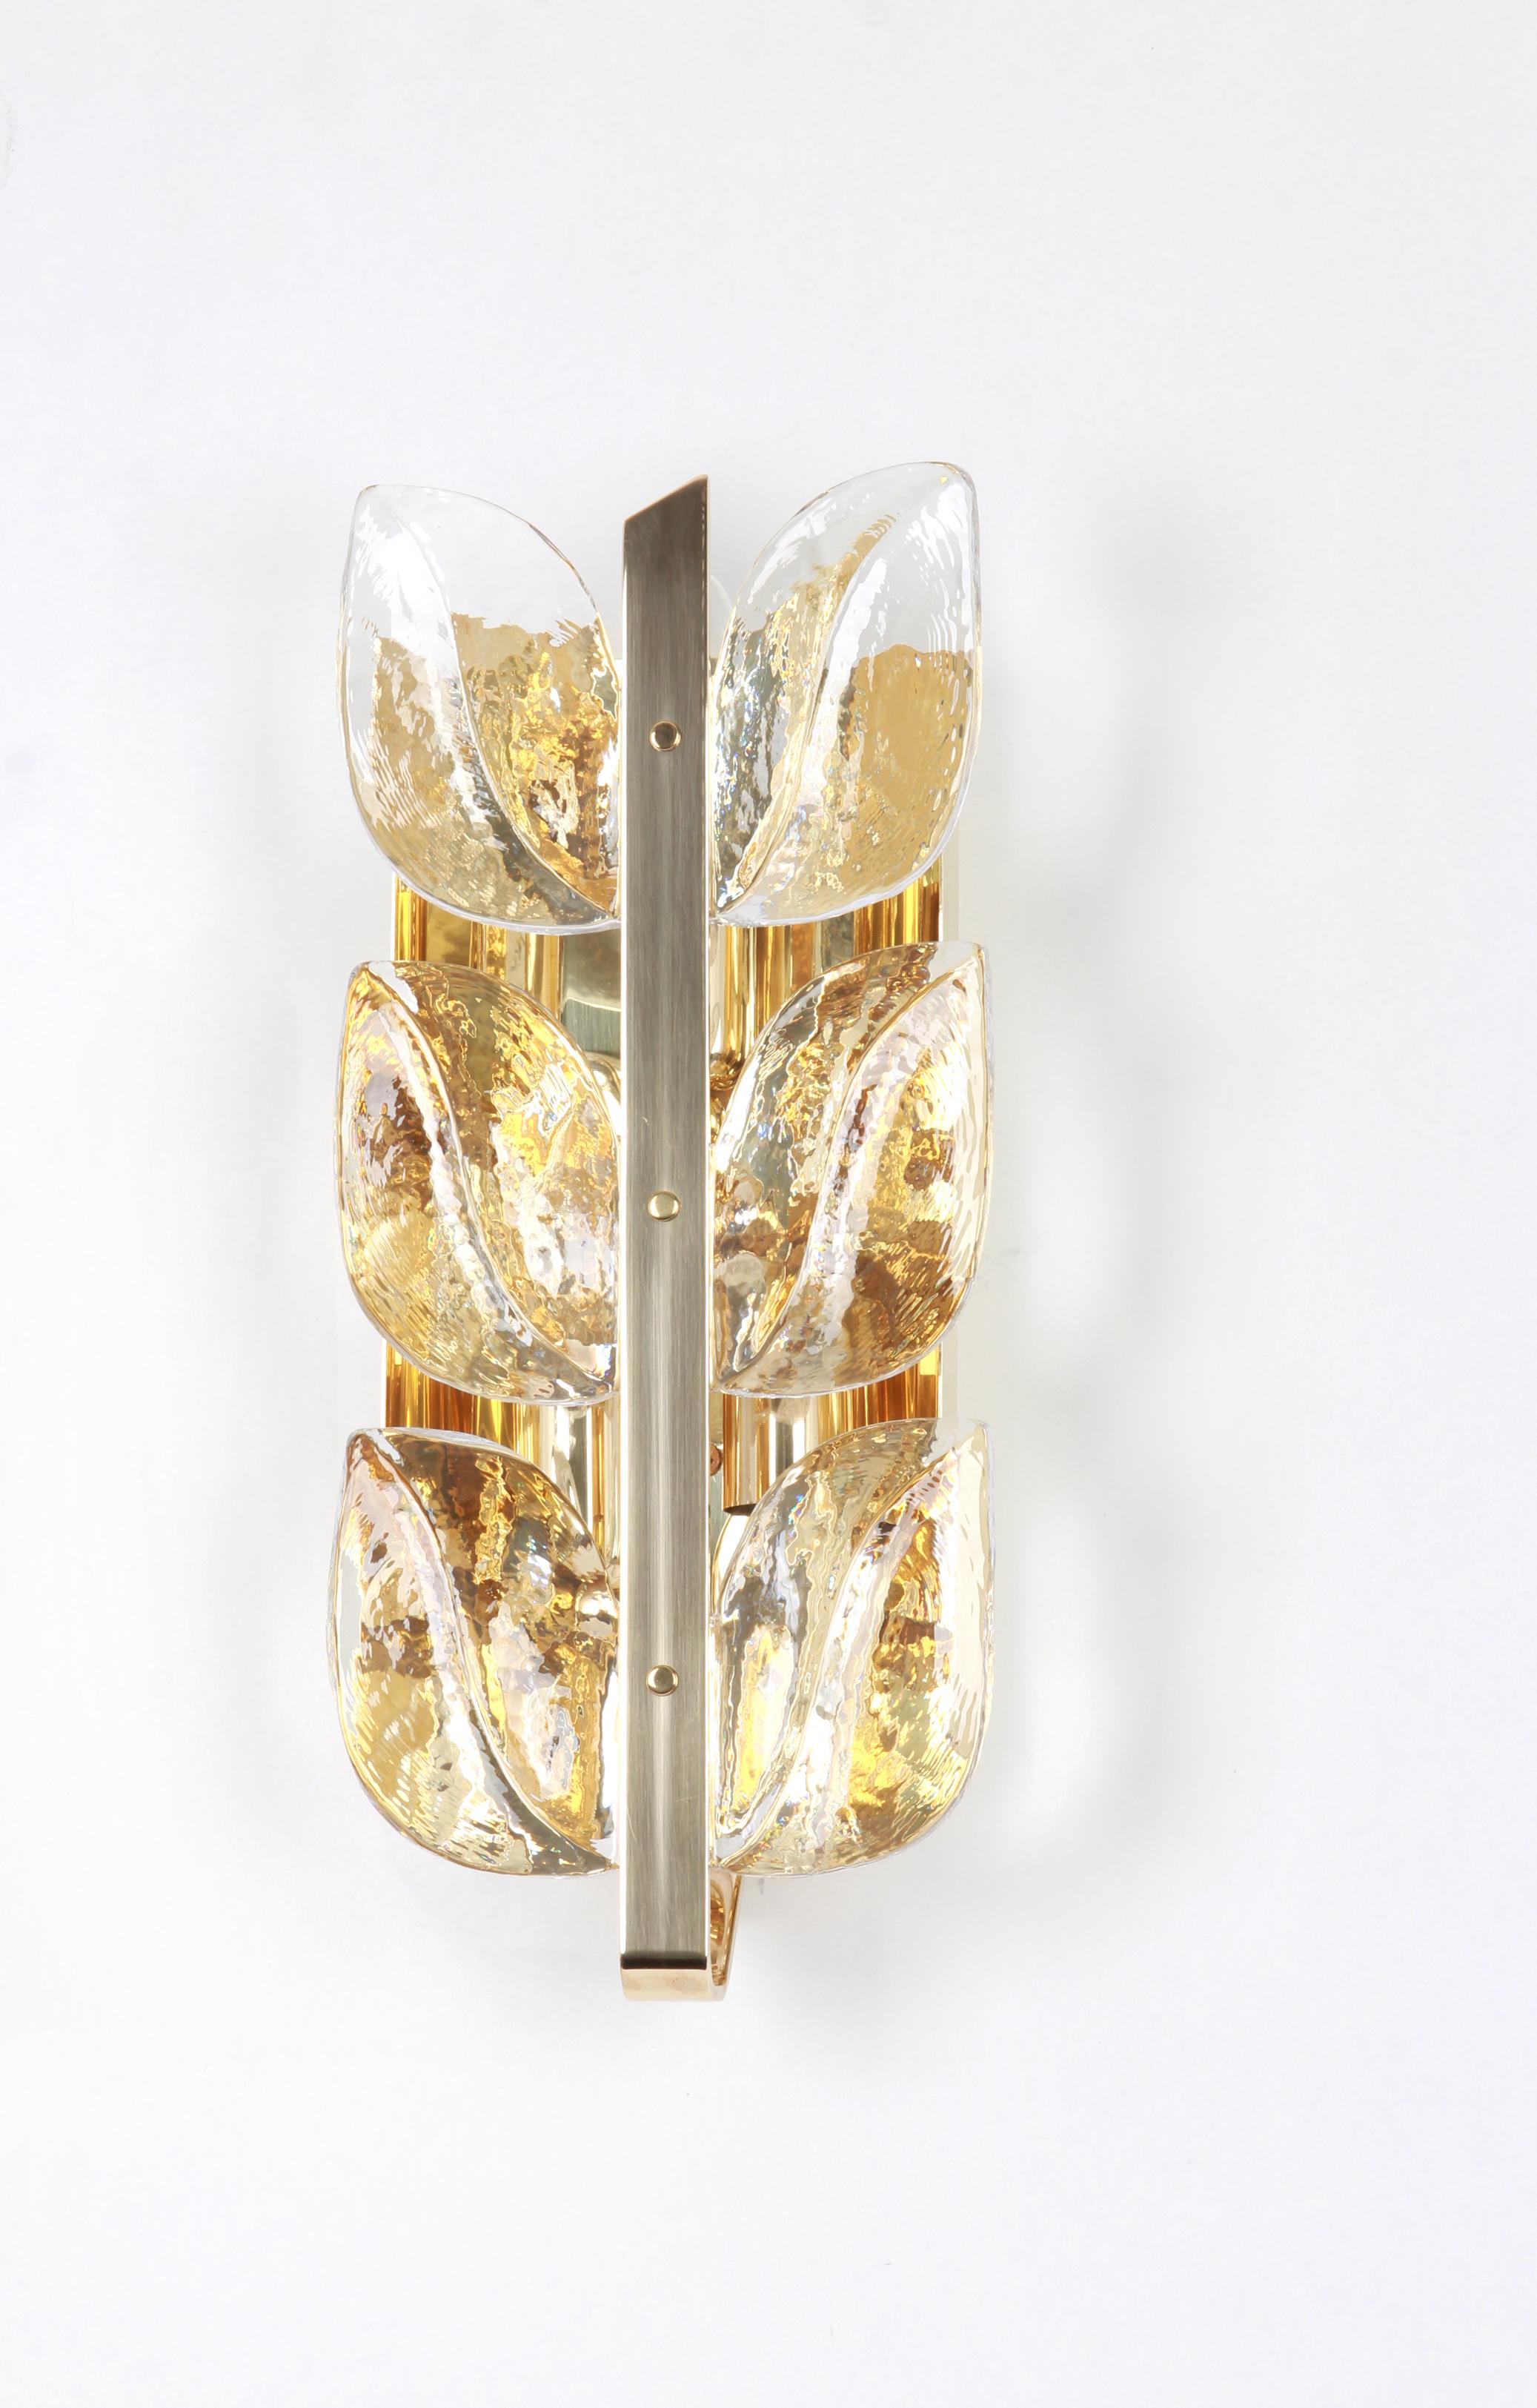 Wonderful pair of midcentury wall sconces with six Murano glass pieces on a gilt brass frame, made by Kalmar, Austria, manufactured circa 1960-1969.
Each sconce needs three E14 small bulbs.
Light bulbs are not included. It is possible to install